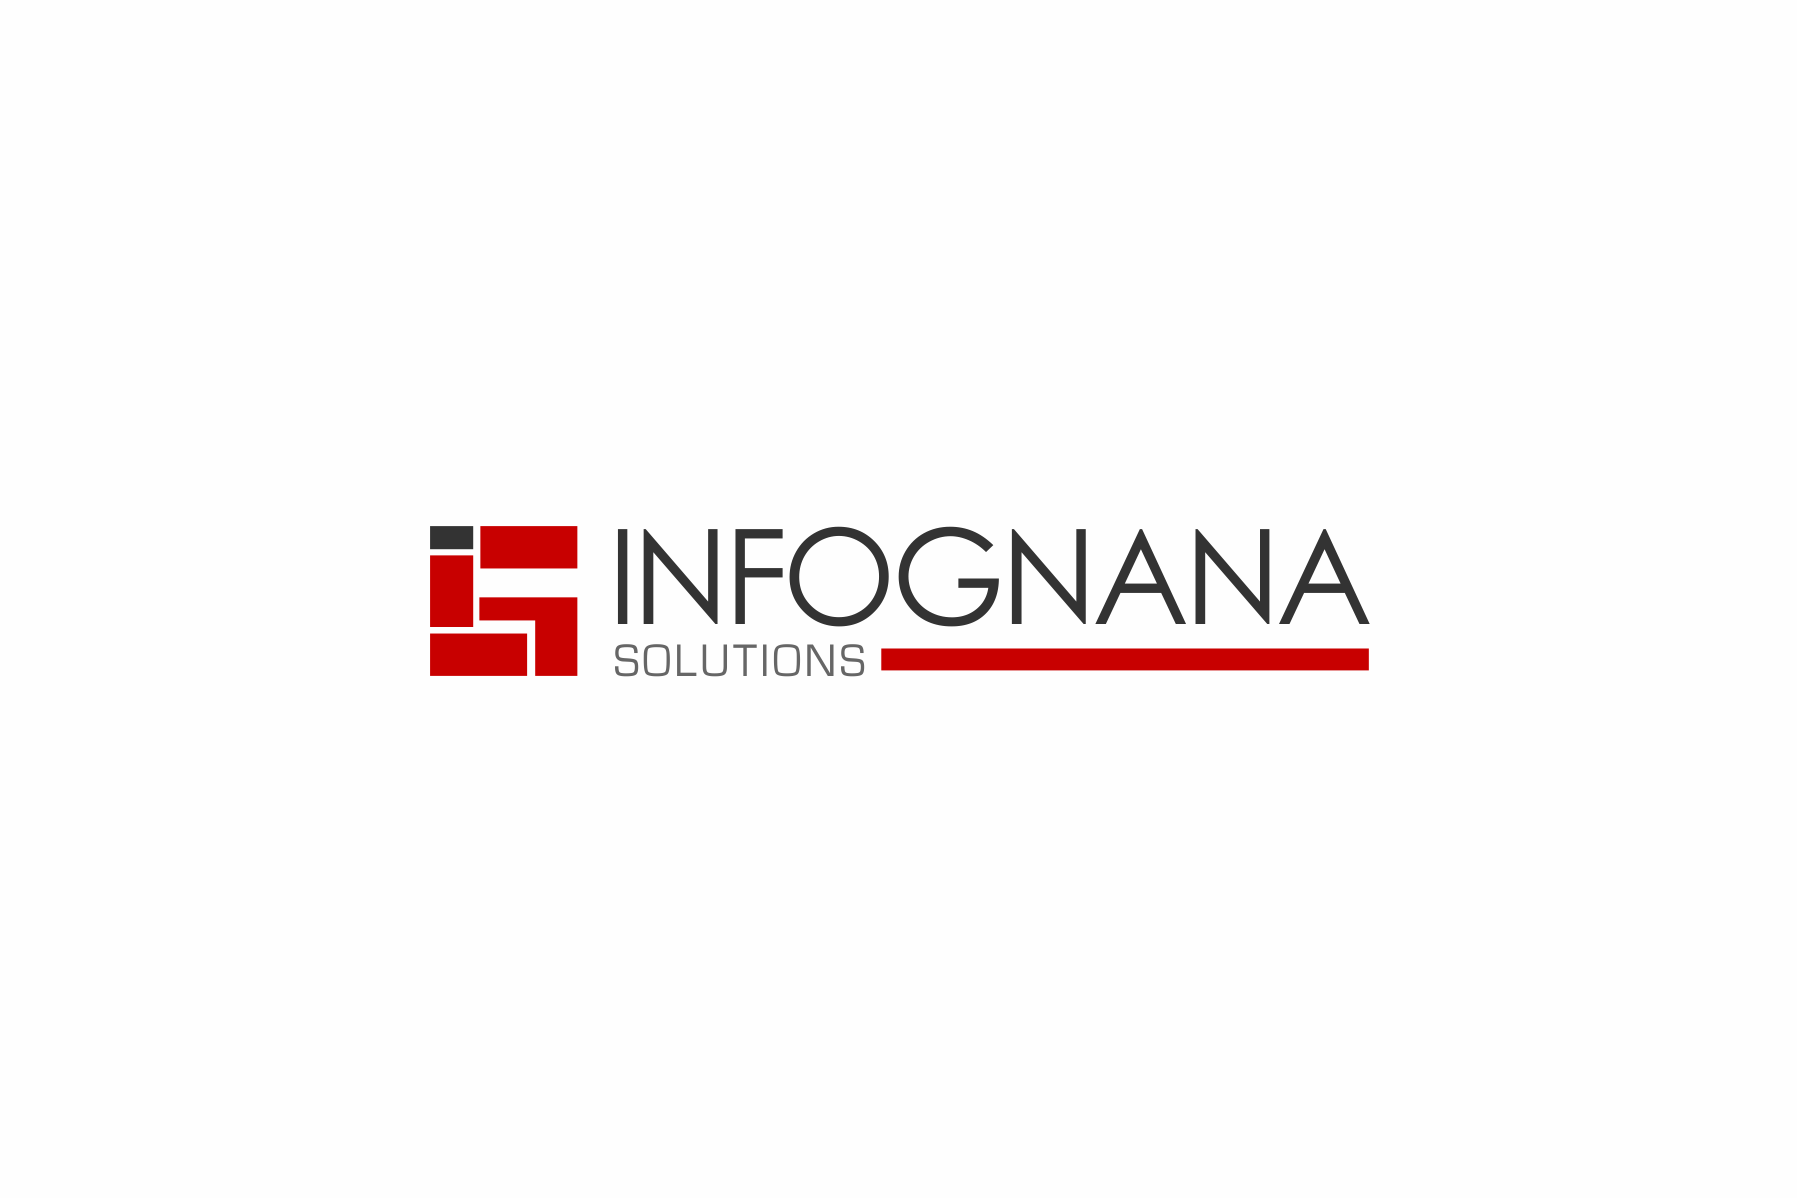 Infognana Solutions profile on Qualified.One